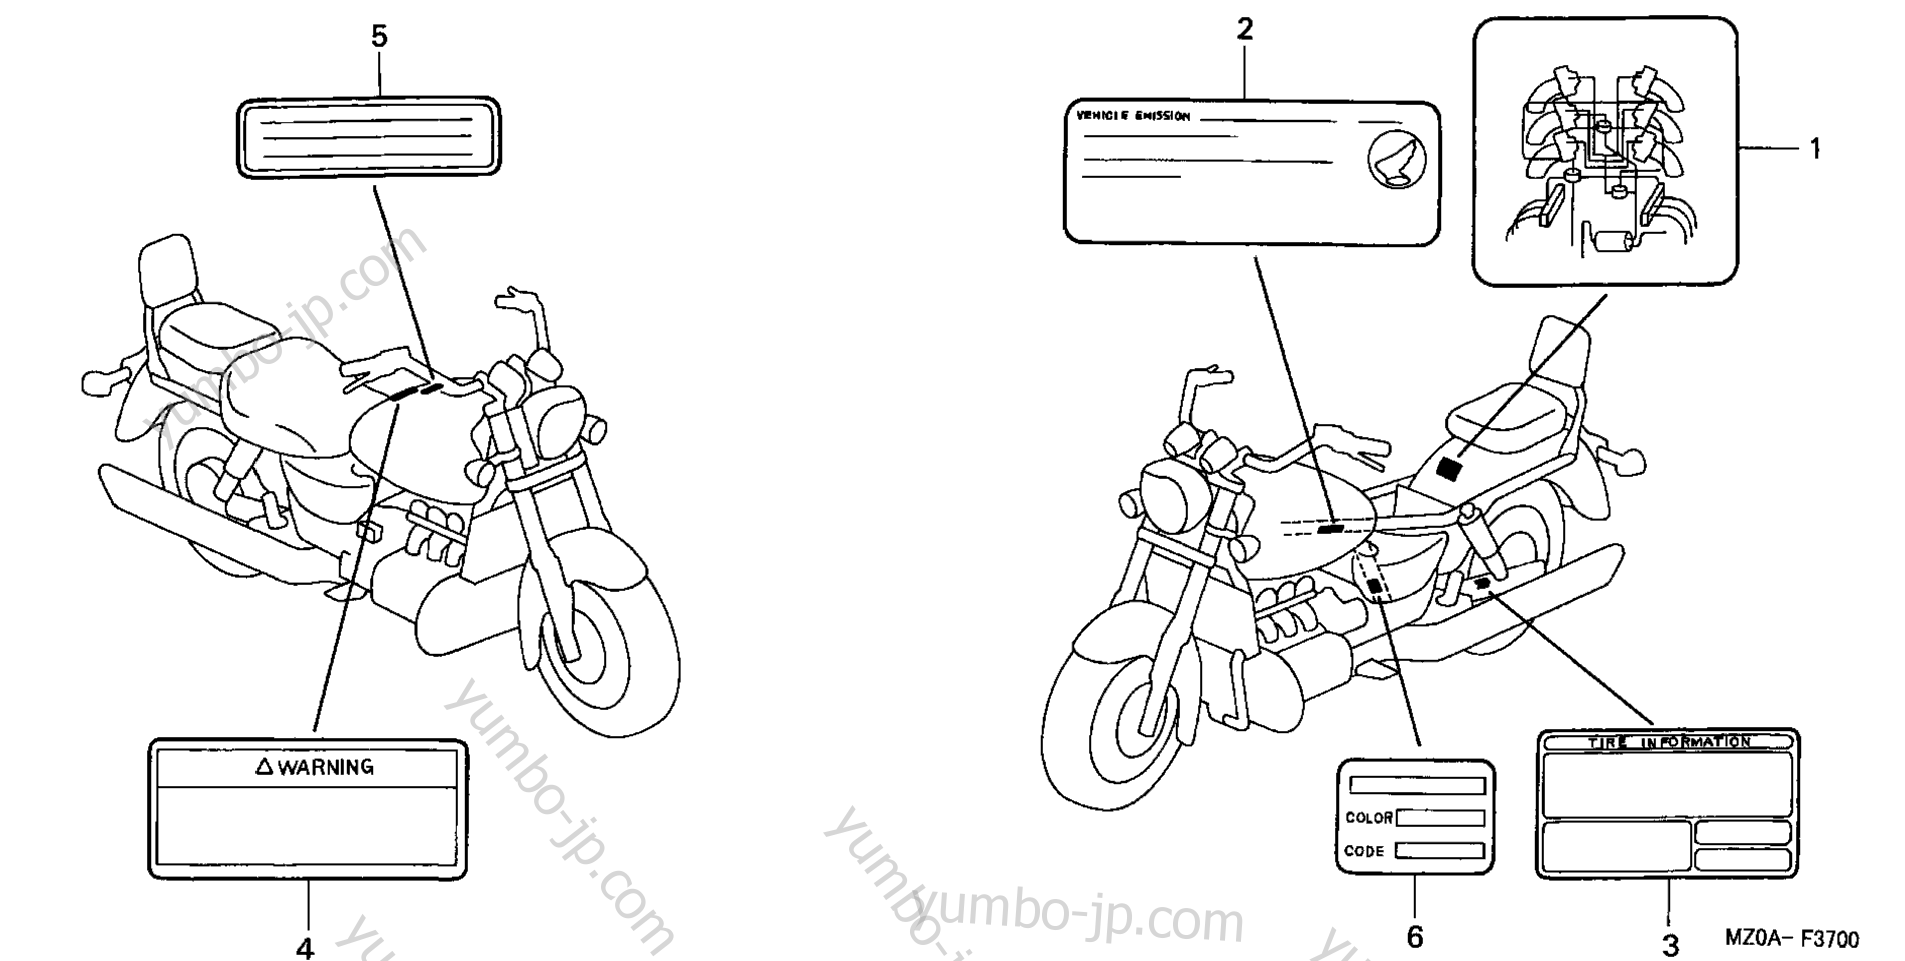 CAUTION LABEL for motorcycles HONDA GL1500CD AC 2001 year